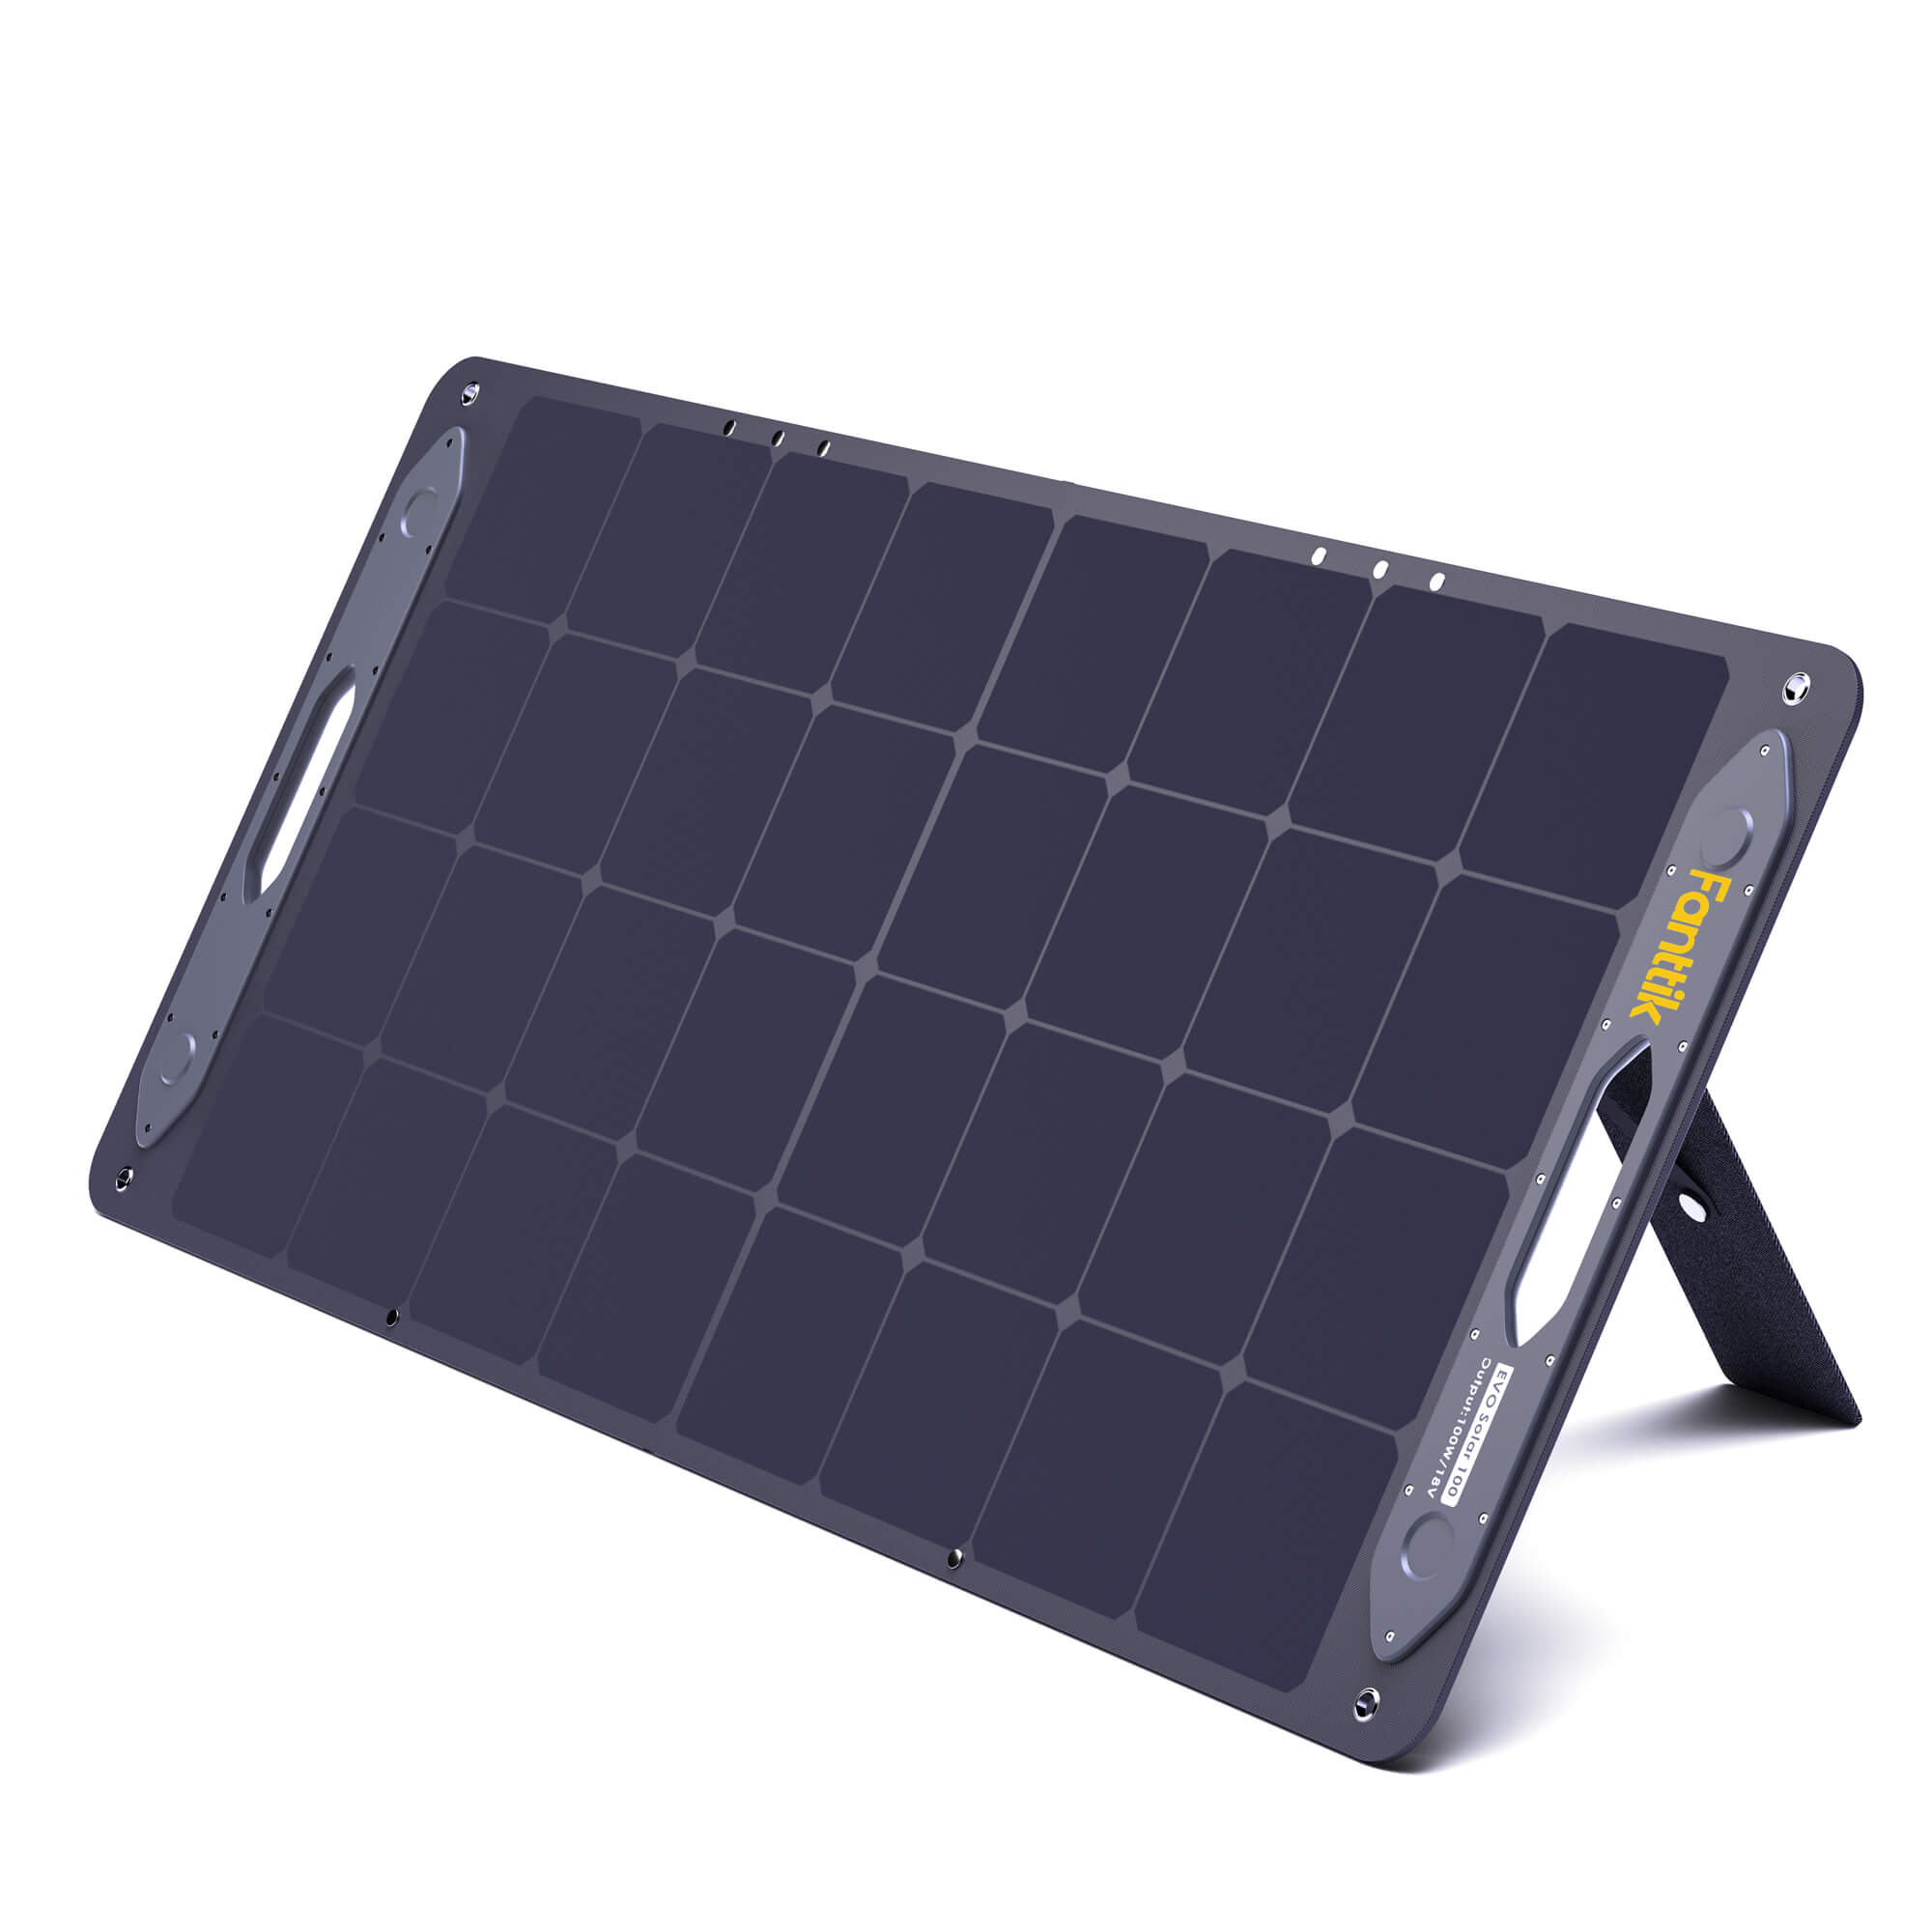 Fanttik Solar Panel has 23% High Solar Conversion Efficiency for EVO 300 Power Station, Foldable Solar Panel Kit with Adjustable Kickstand, Splash-Proof IP65 for Outdoor Camping RV